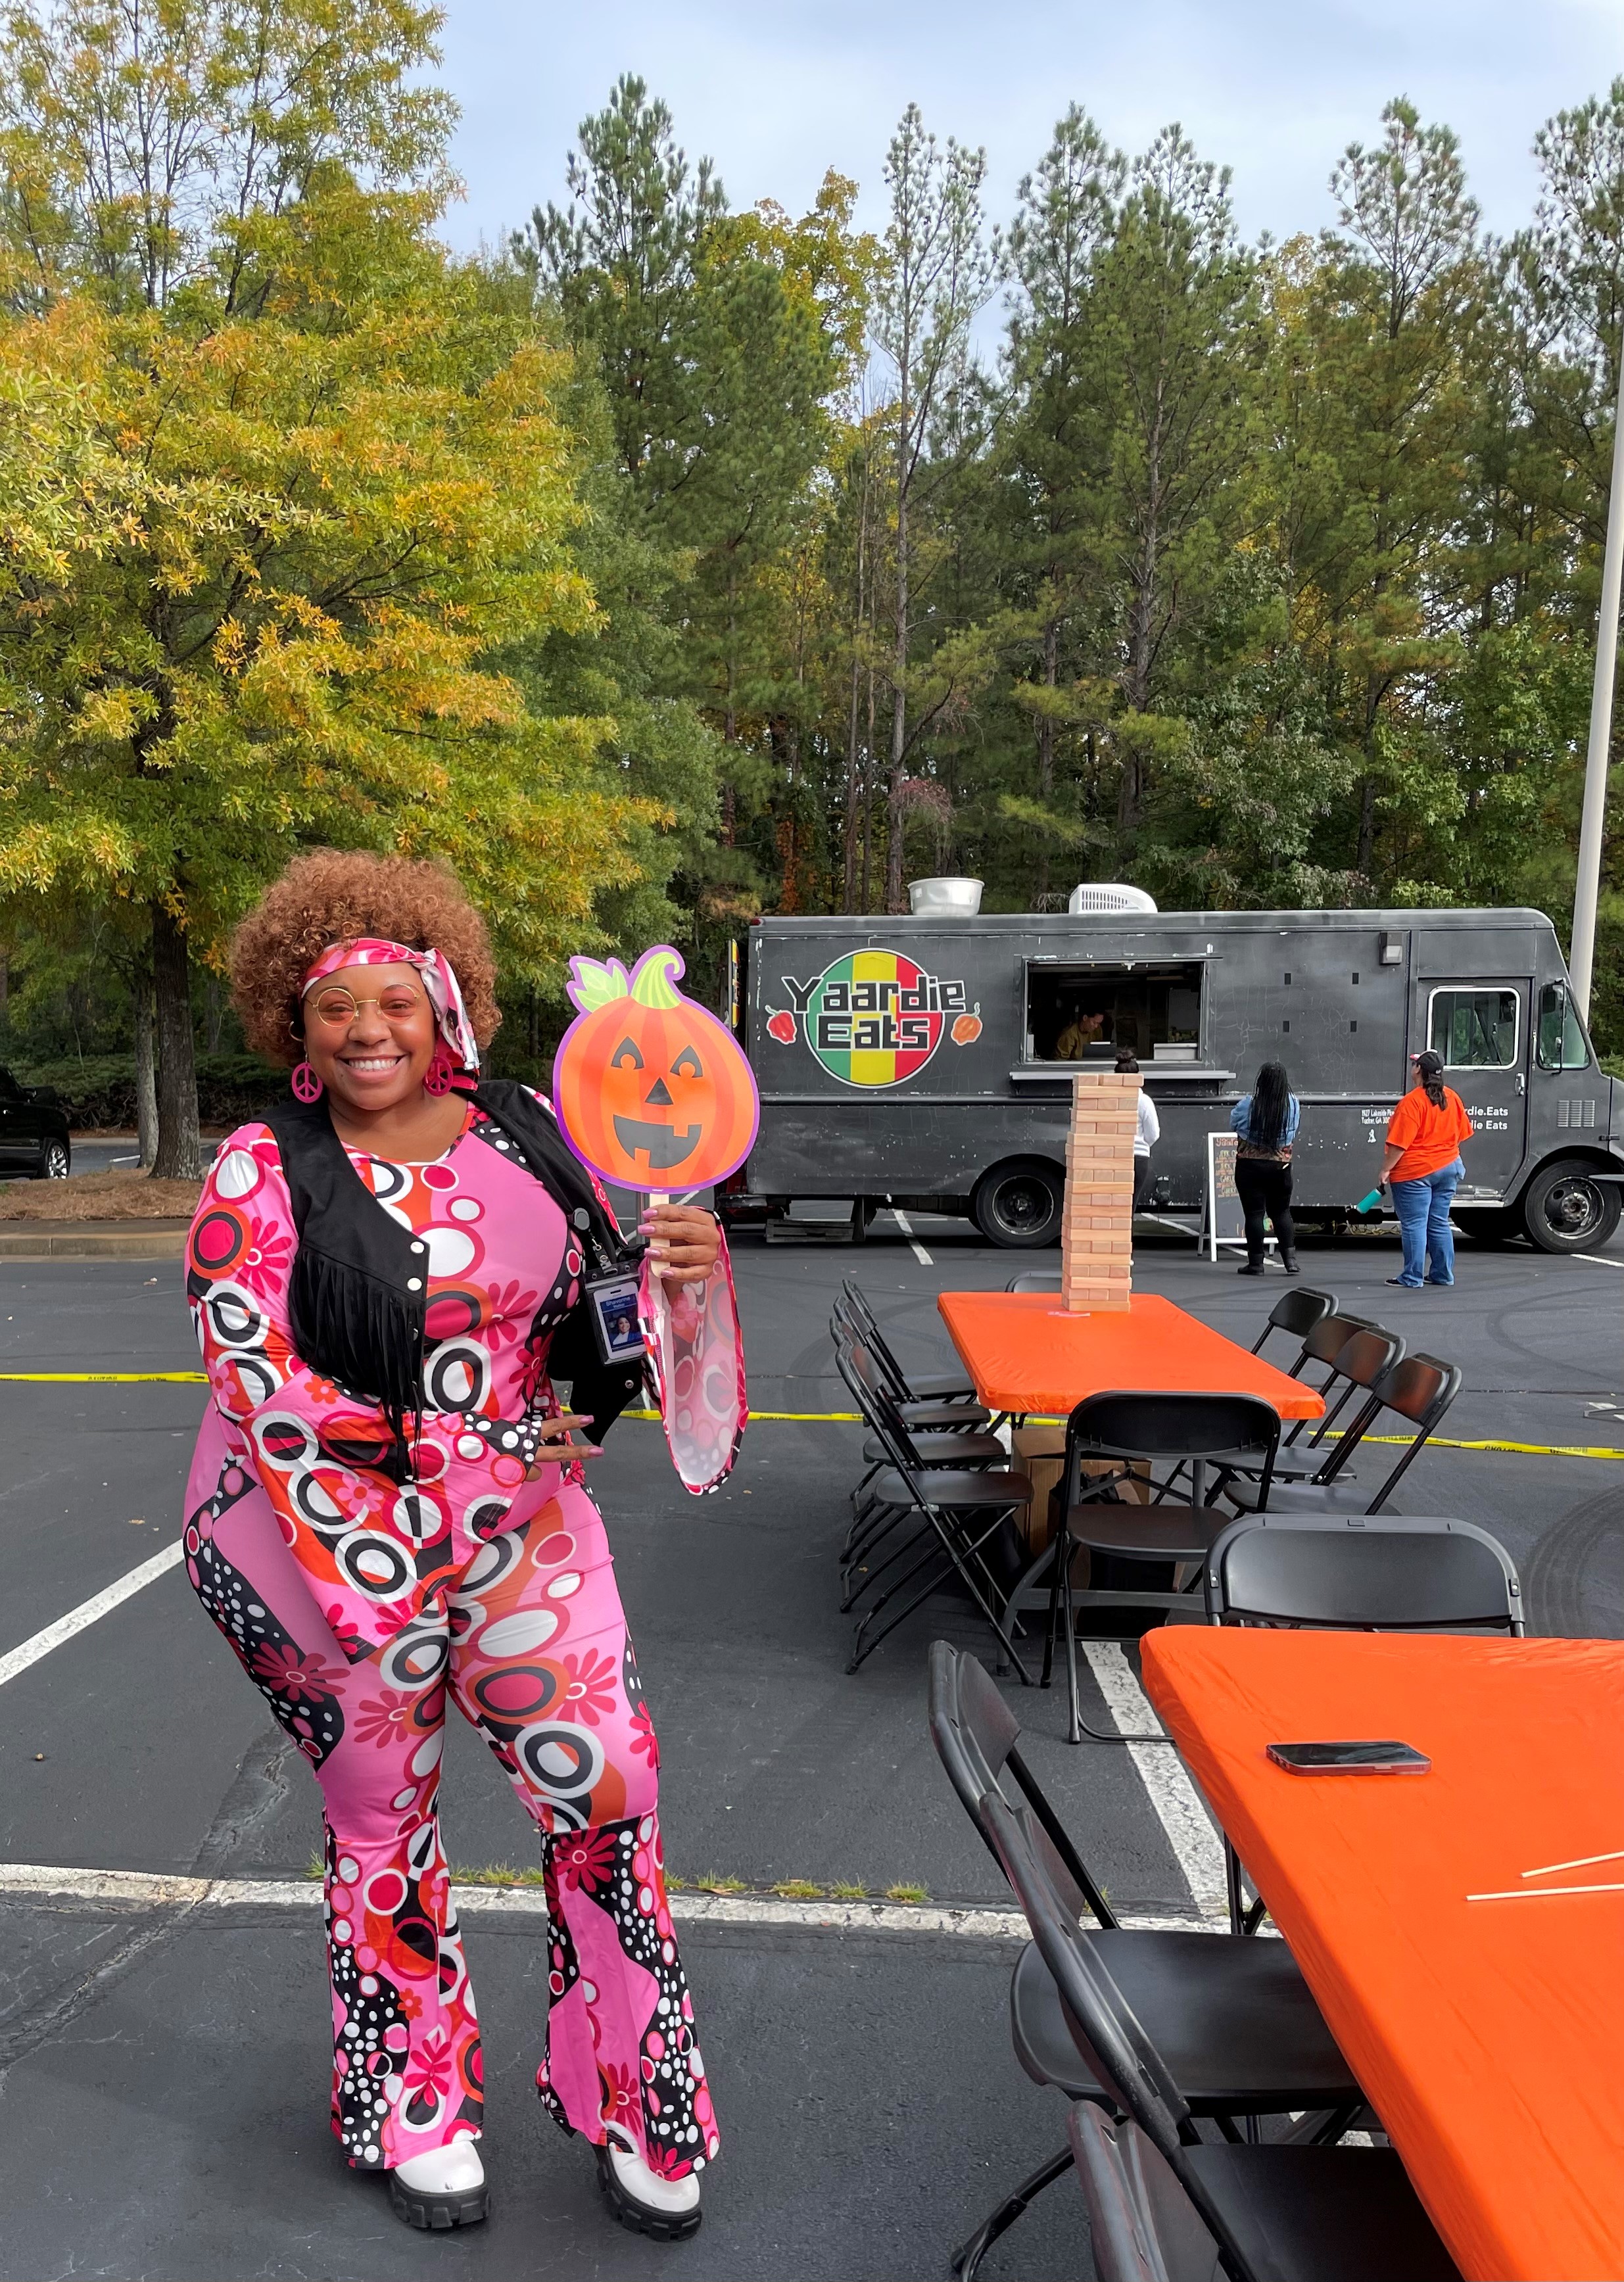 Yardi employee at costume contest party for spirit spooky season